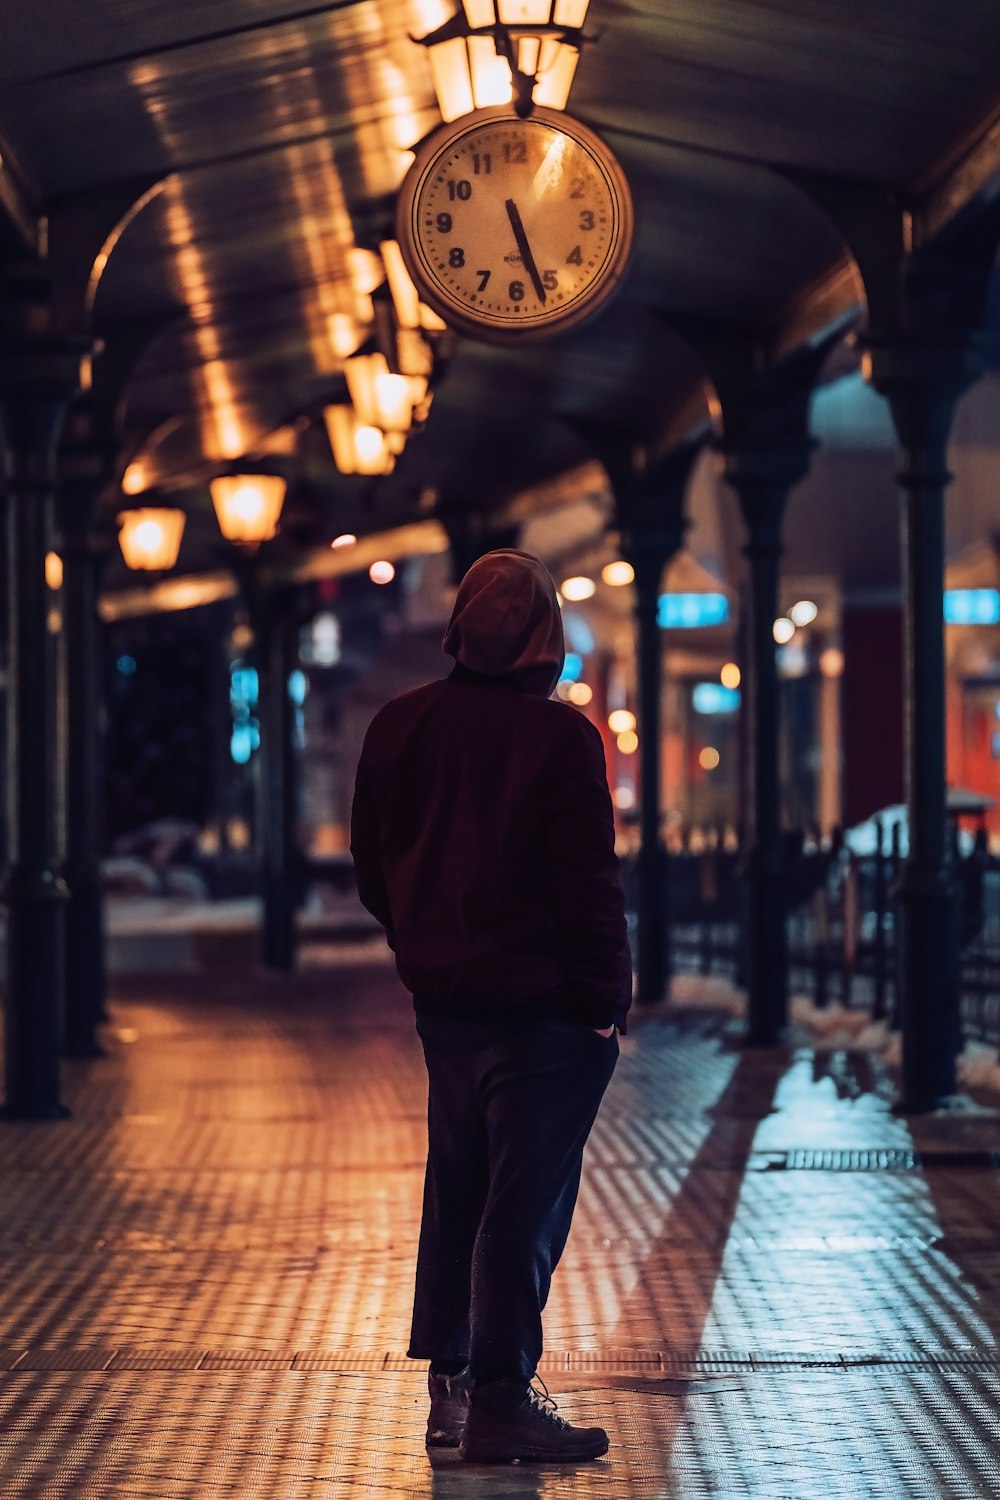 a man standing under a clock in a train station